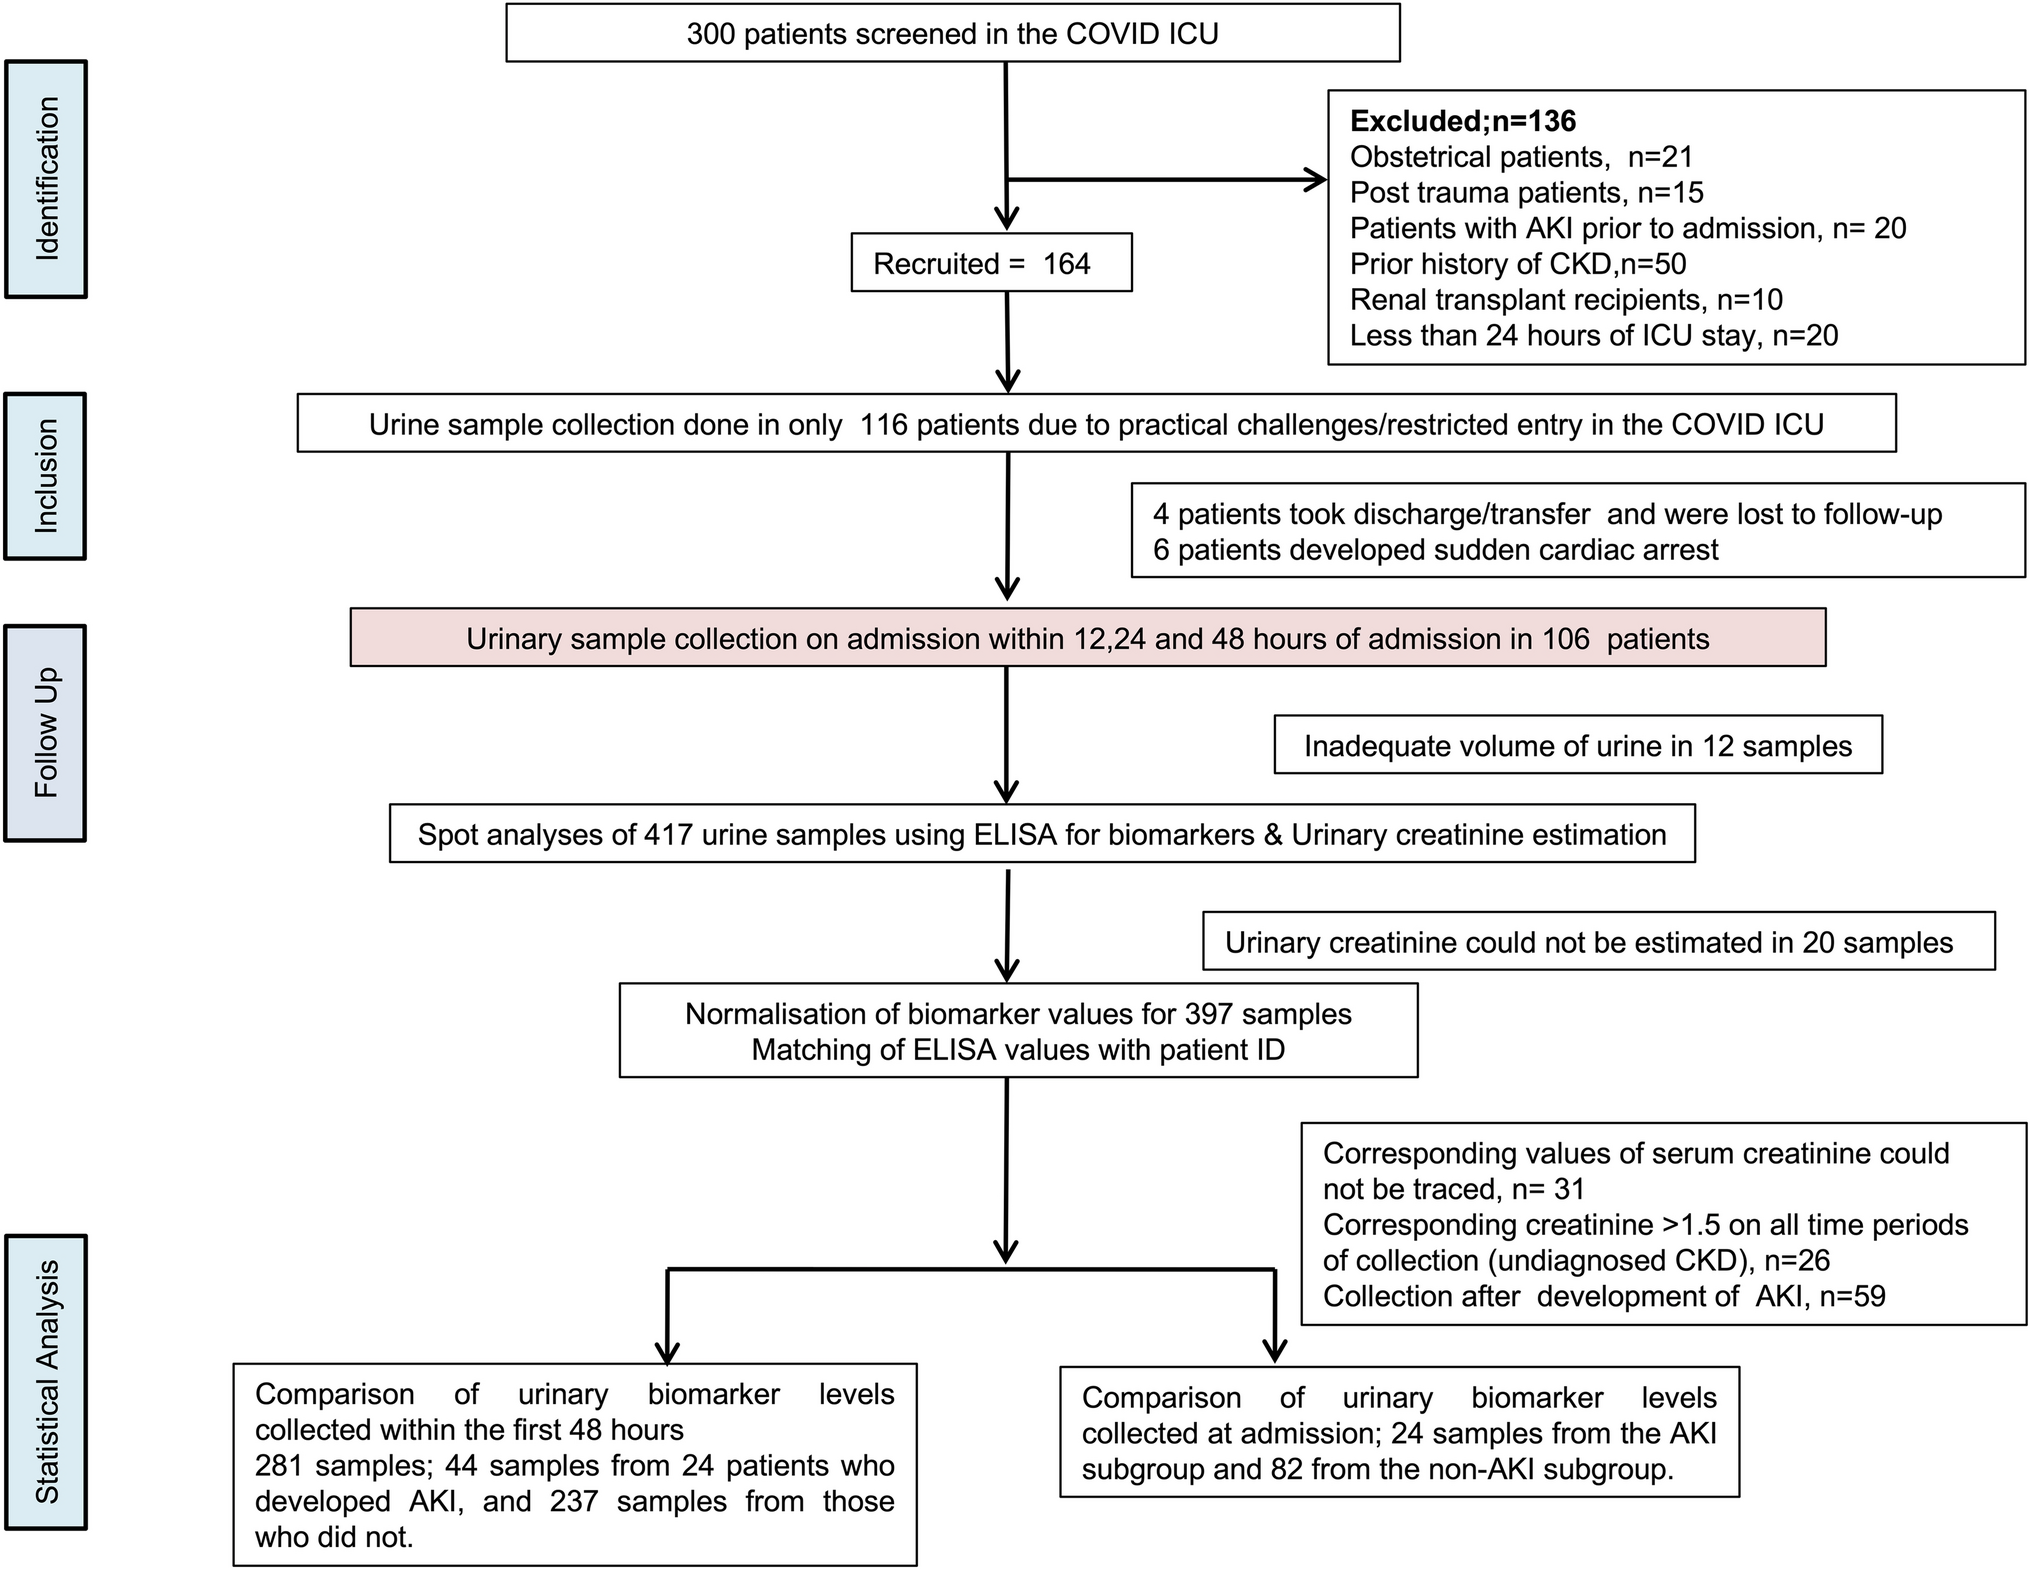 Utility of Urinary Biomarkers for Diagnosis of Acute Kidney Injury (AKI) in COVID-19